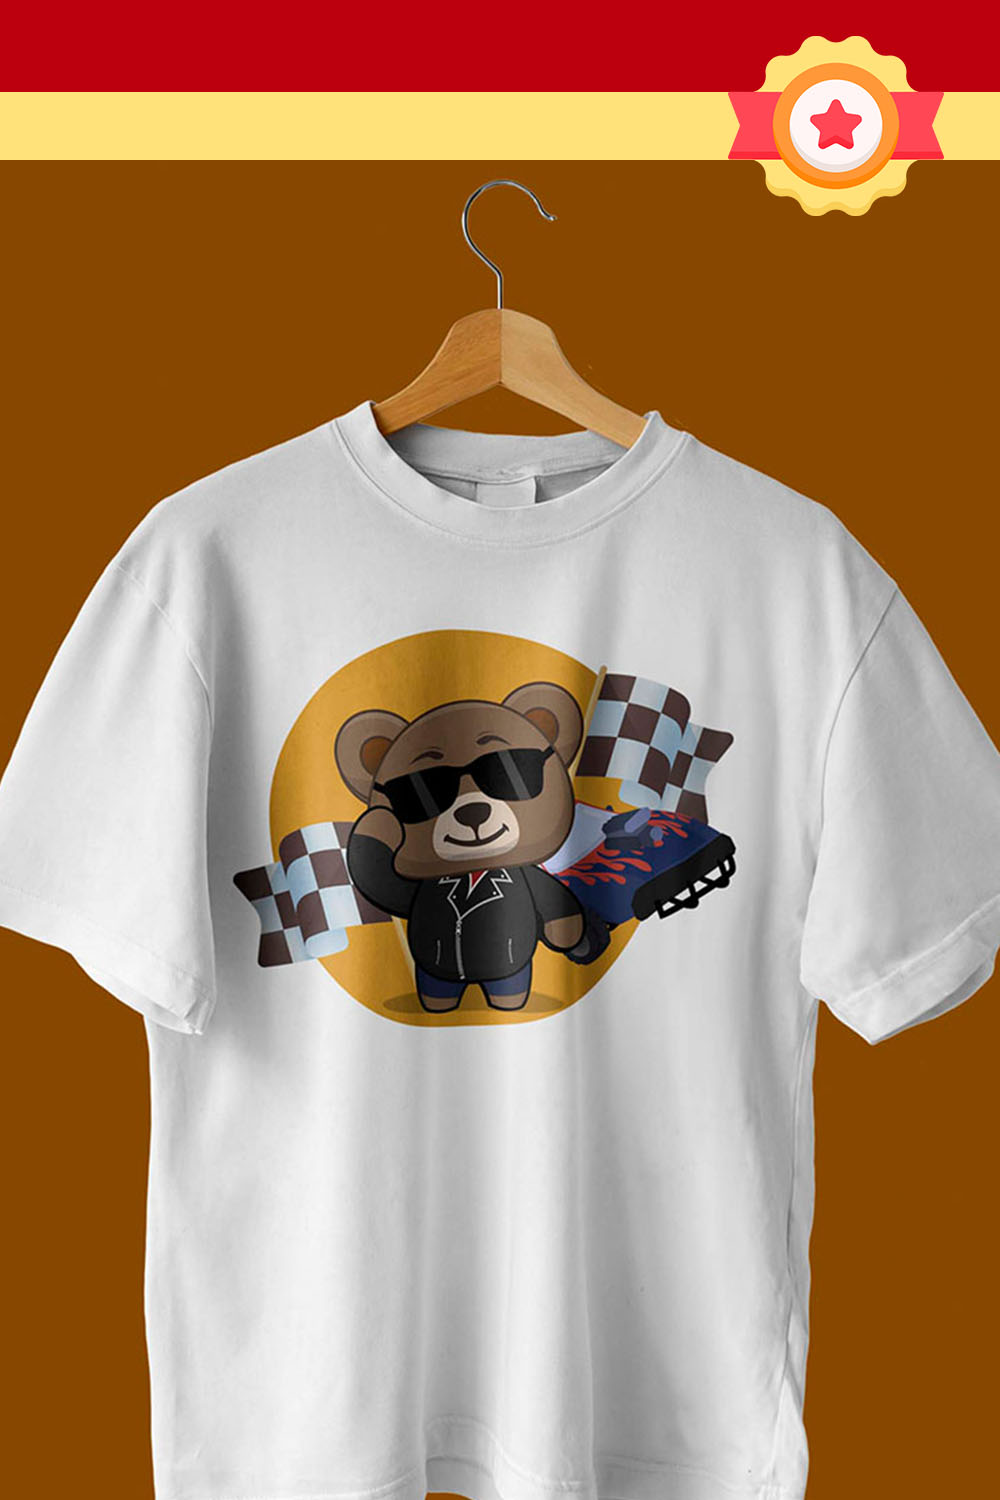 Bear with Sunglasses T-shirt Design Pinterest collage image.